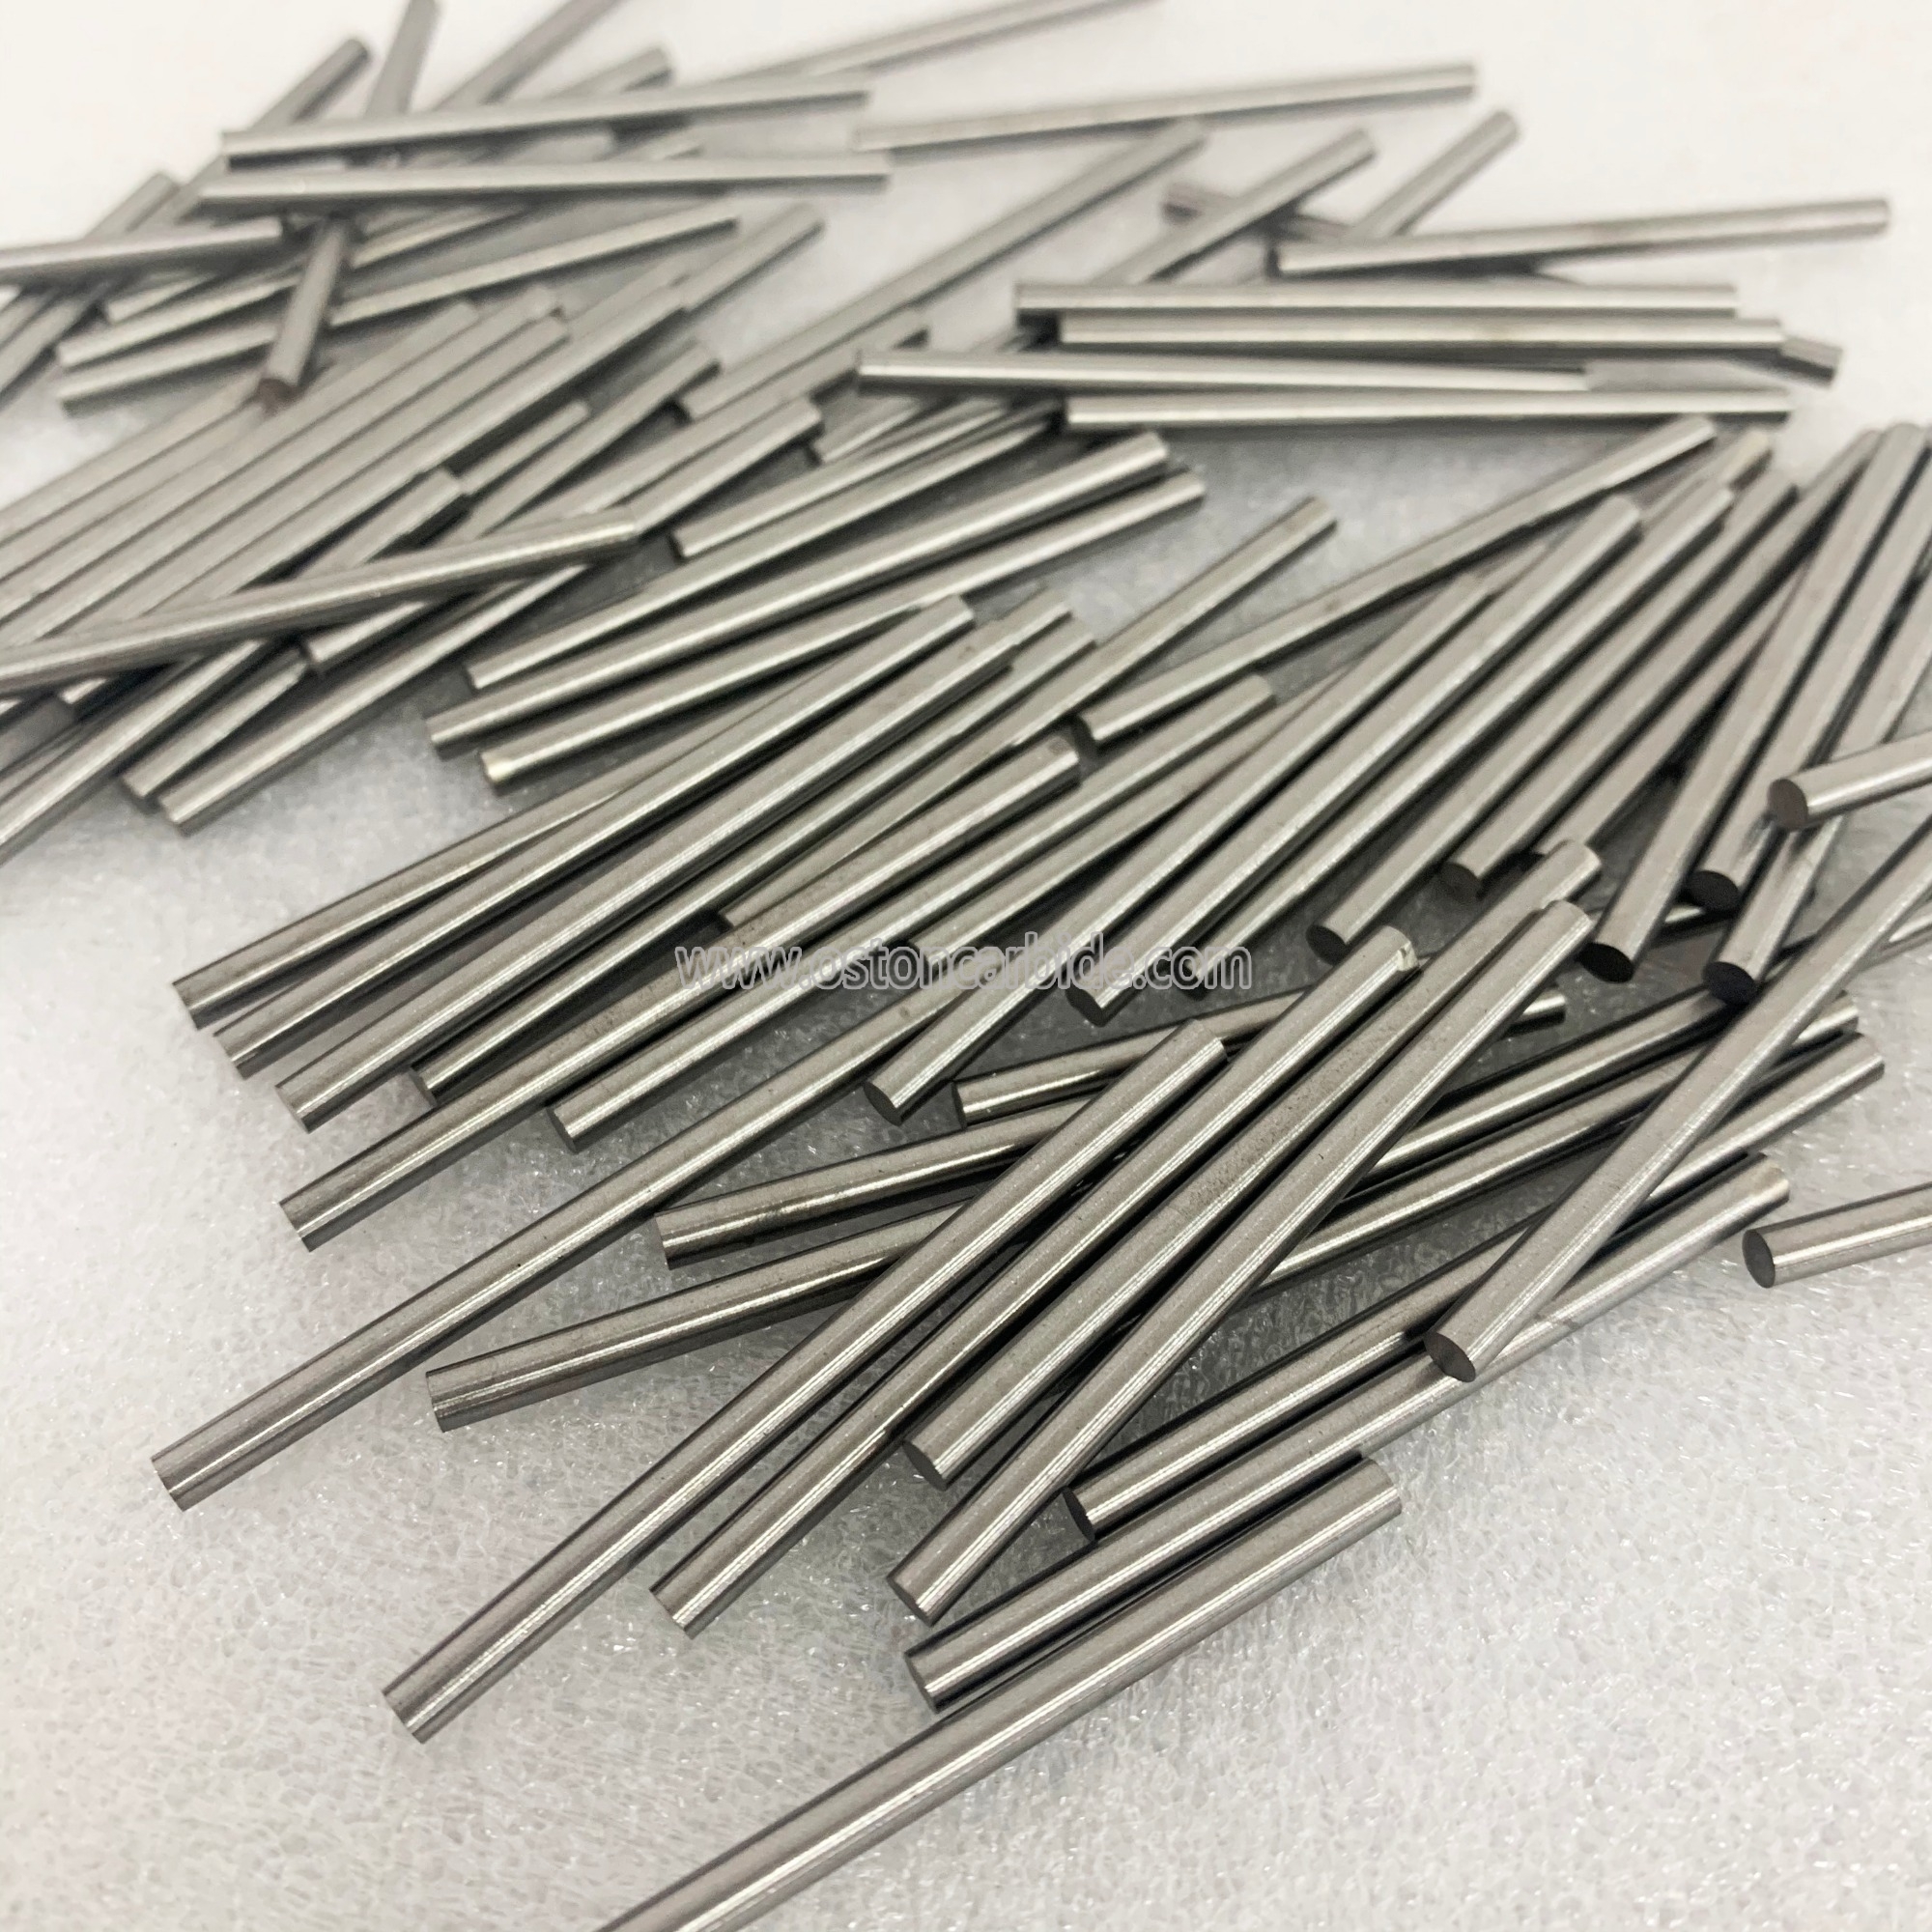  Polished Solid Carbide Pins 